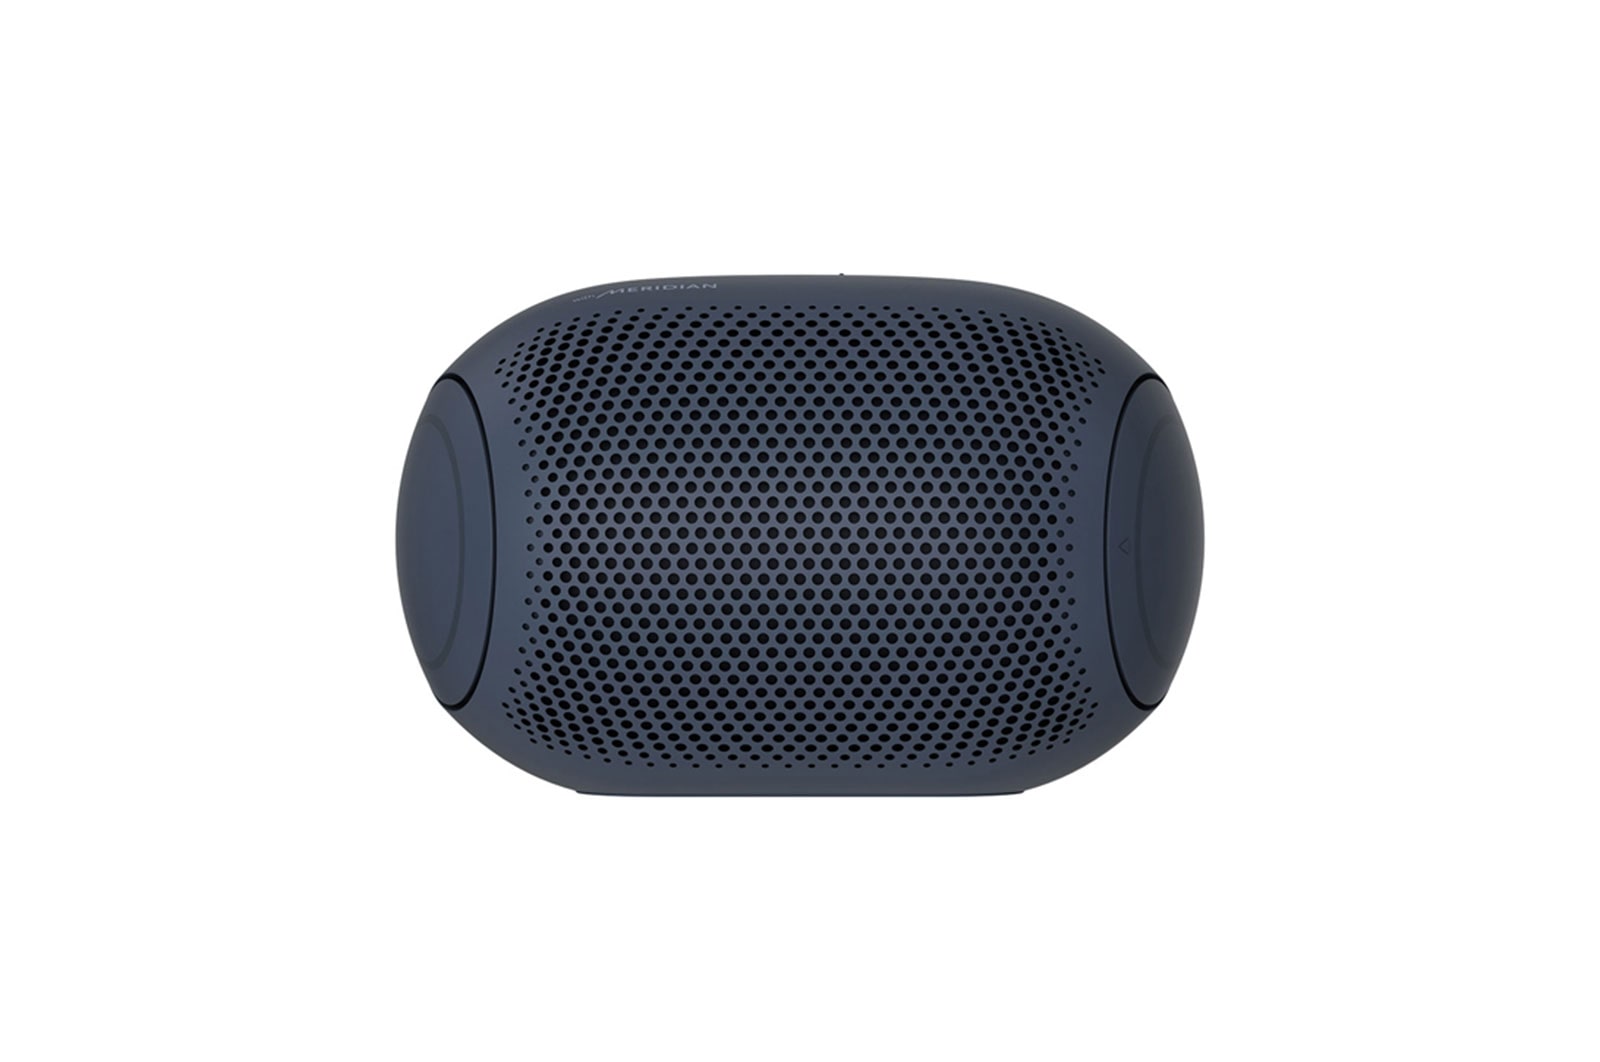 LG XBOOM Go PL2 Portable Wireless Bluetooth Speaker, IPX5 Water-Resistant Compact Wireless Party Speaker with up to 10 Hours playback, Black